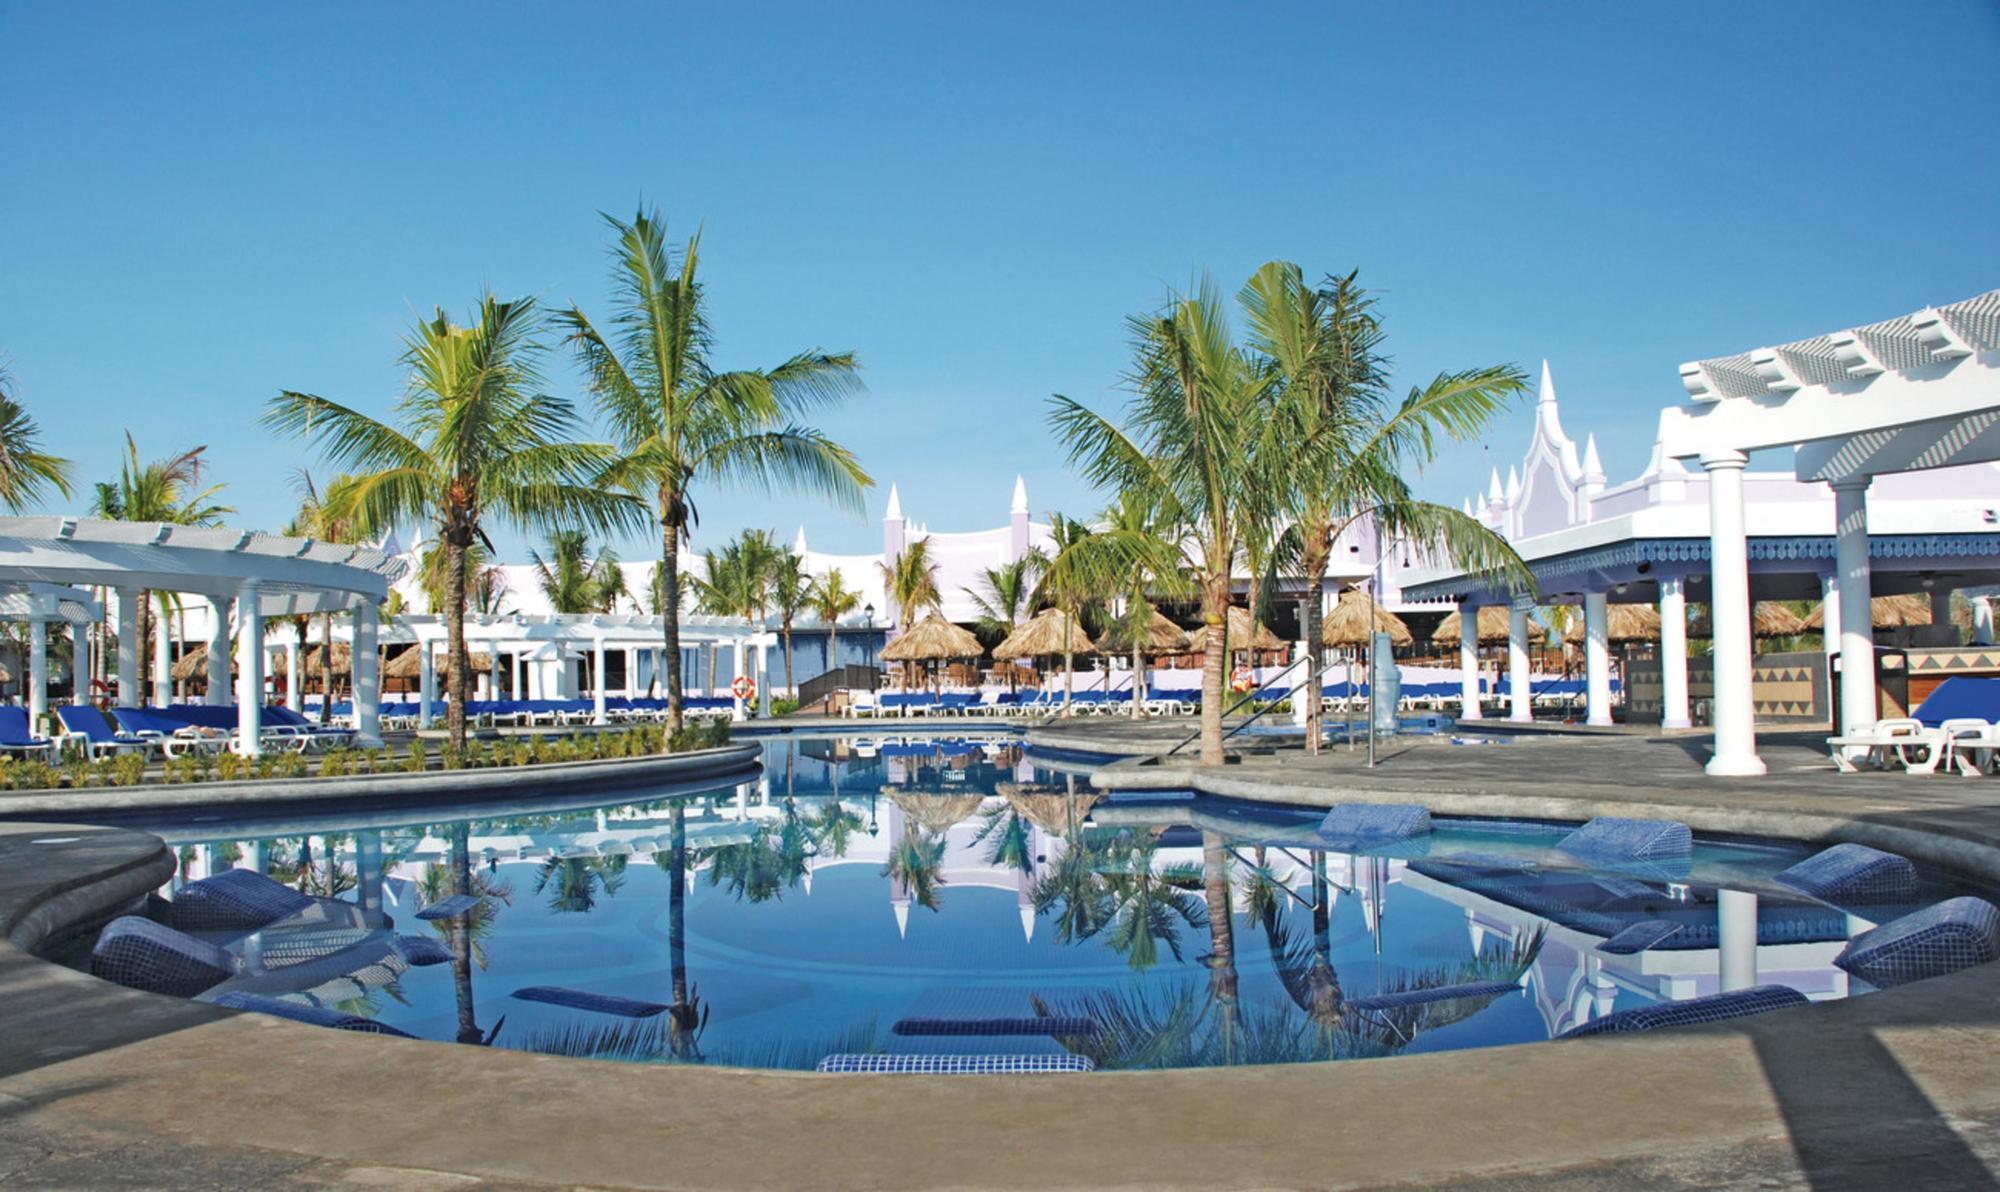 Riu Montego Bay (Adults Only) Hotel Facilities photo